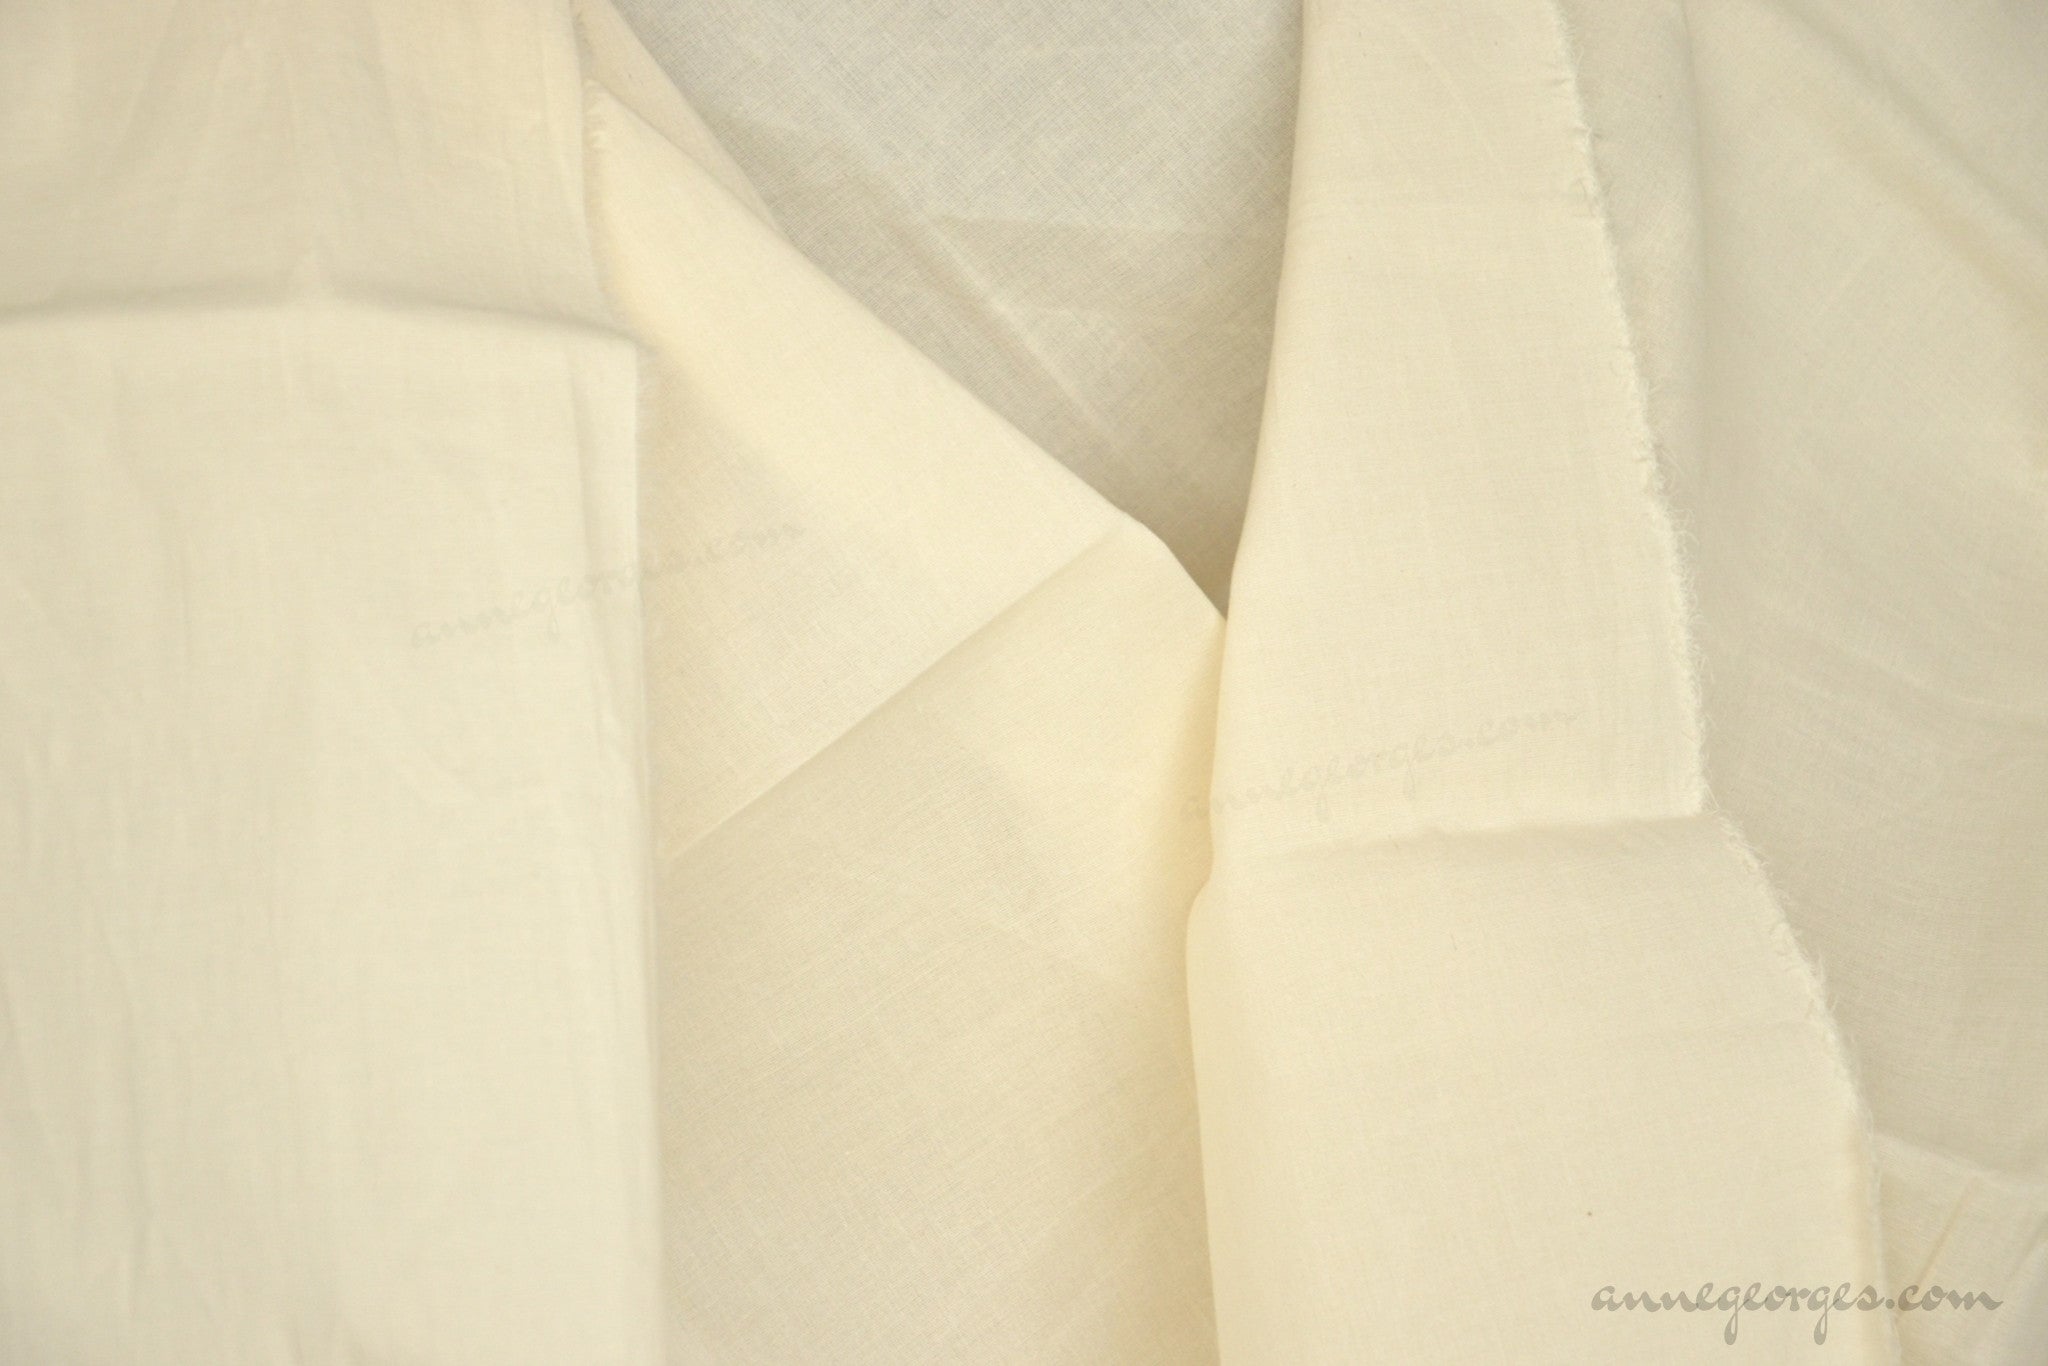 Organic Cotton Stretch Fabric ( Cambric Lycra, Unbleached Dyeable )